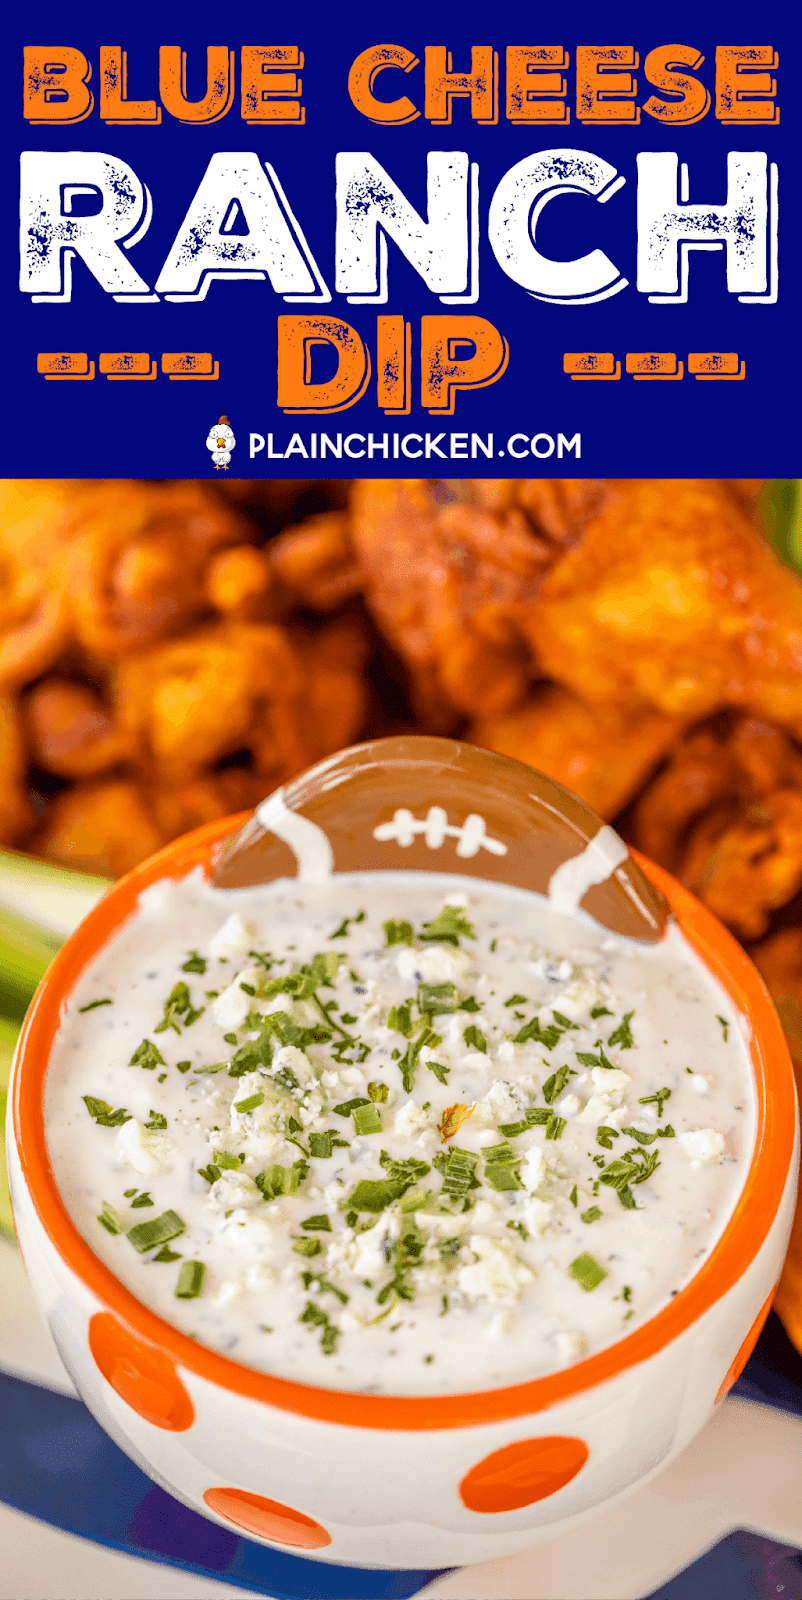 Blue Cheese Ranch Dip - the best of both worlds!! So simple and it tastes 1000 times better than the bottled stuff! Hellmann's/Best Foods Mayonnaise, buttermilk, pepper, chives, parsley, dill weed, garlic, onion, salt and blue cheese. Perfect accompaniment to your game day wings!